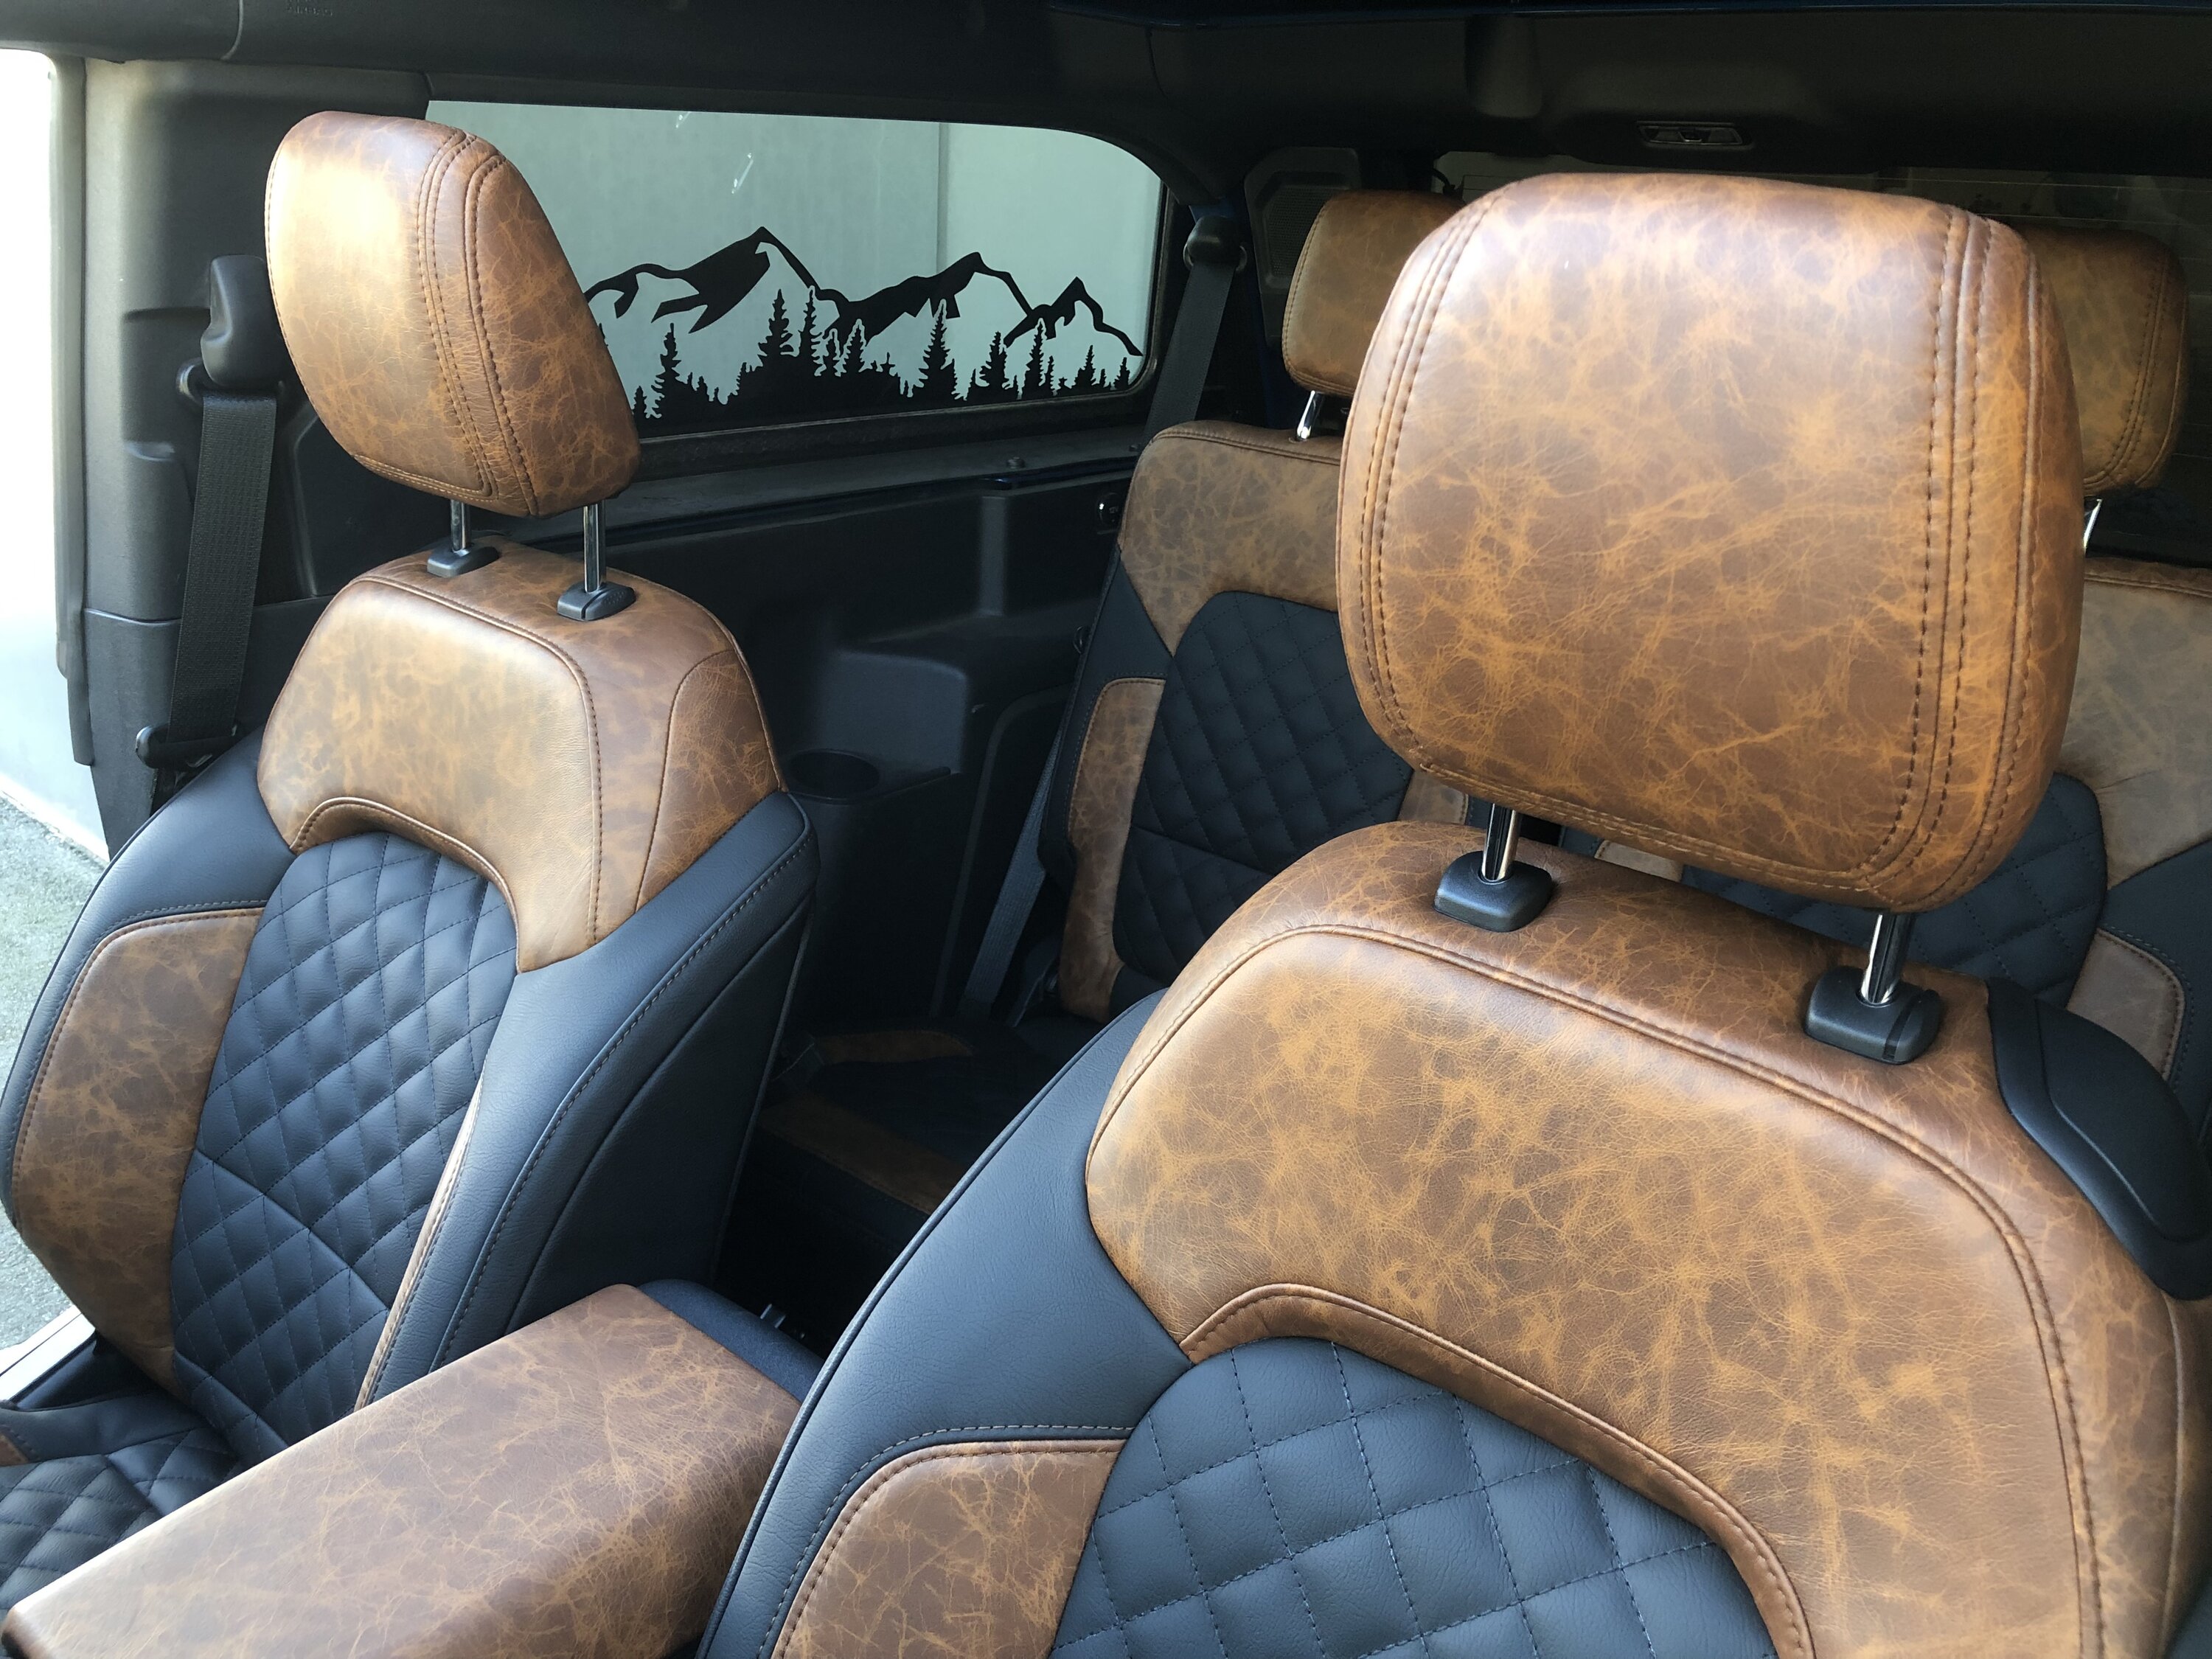 Ford Bronco Custom Interior & Seats Inspired by Pre-Production Bronco 25A57248-8392-4B81-A6D1-BE26C08FC3FA